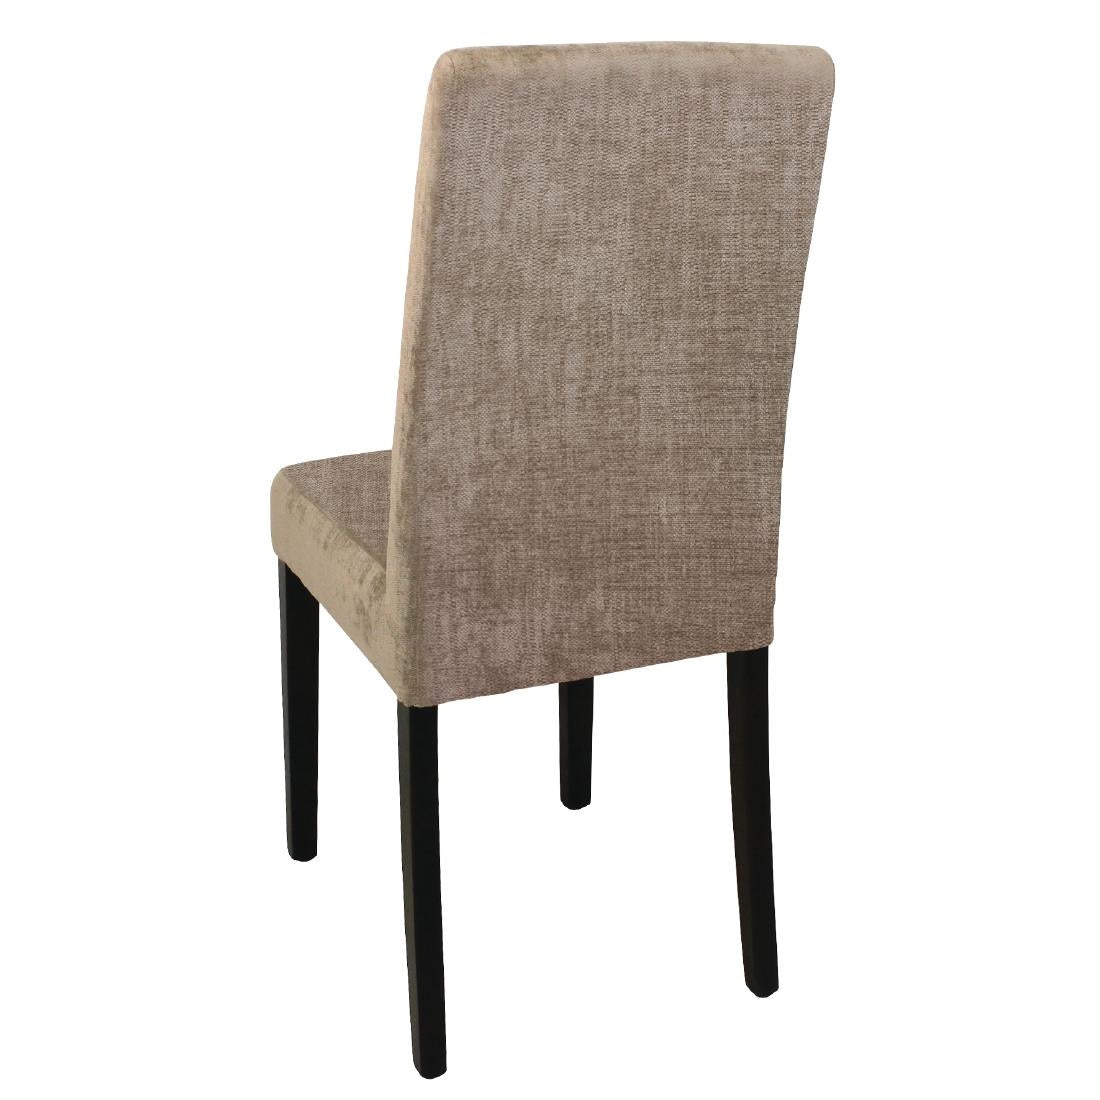 Bolero Dining Chairs Beige (Pack of 2) JD Catering Equipment Solutions Ltd